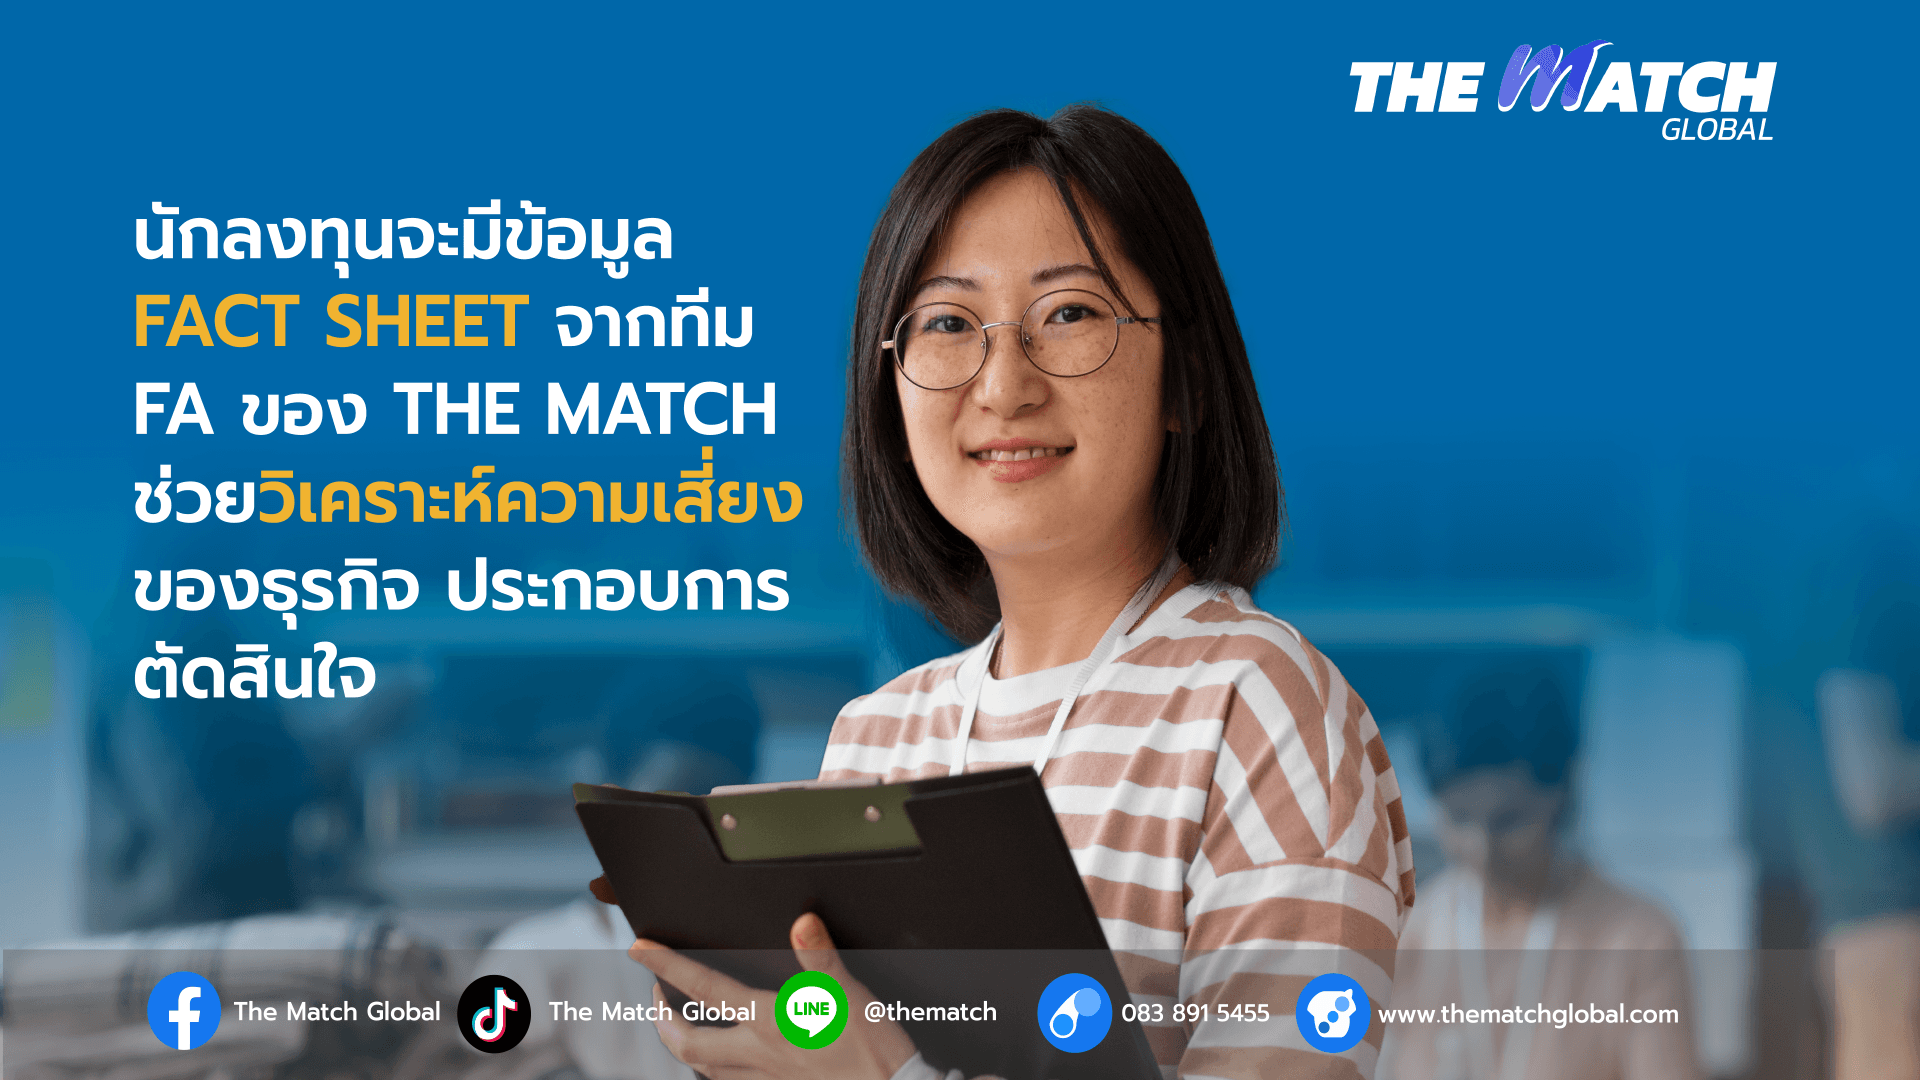 THE MATCH GLOBAL